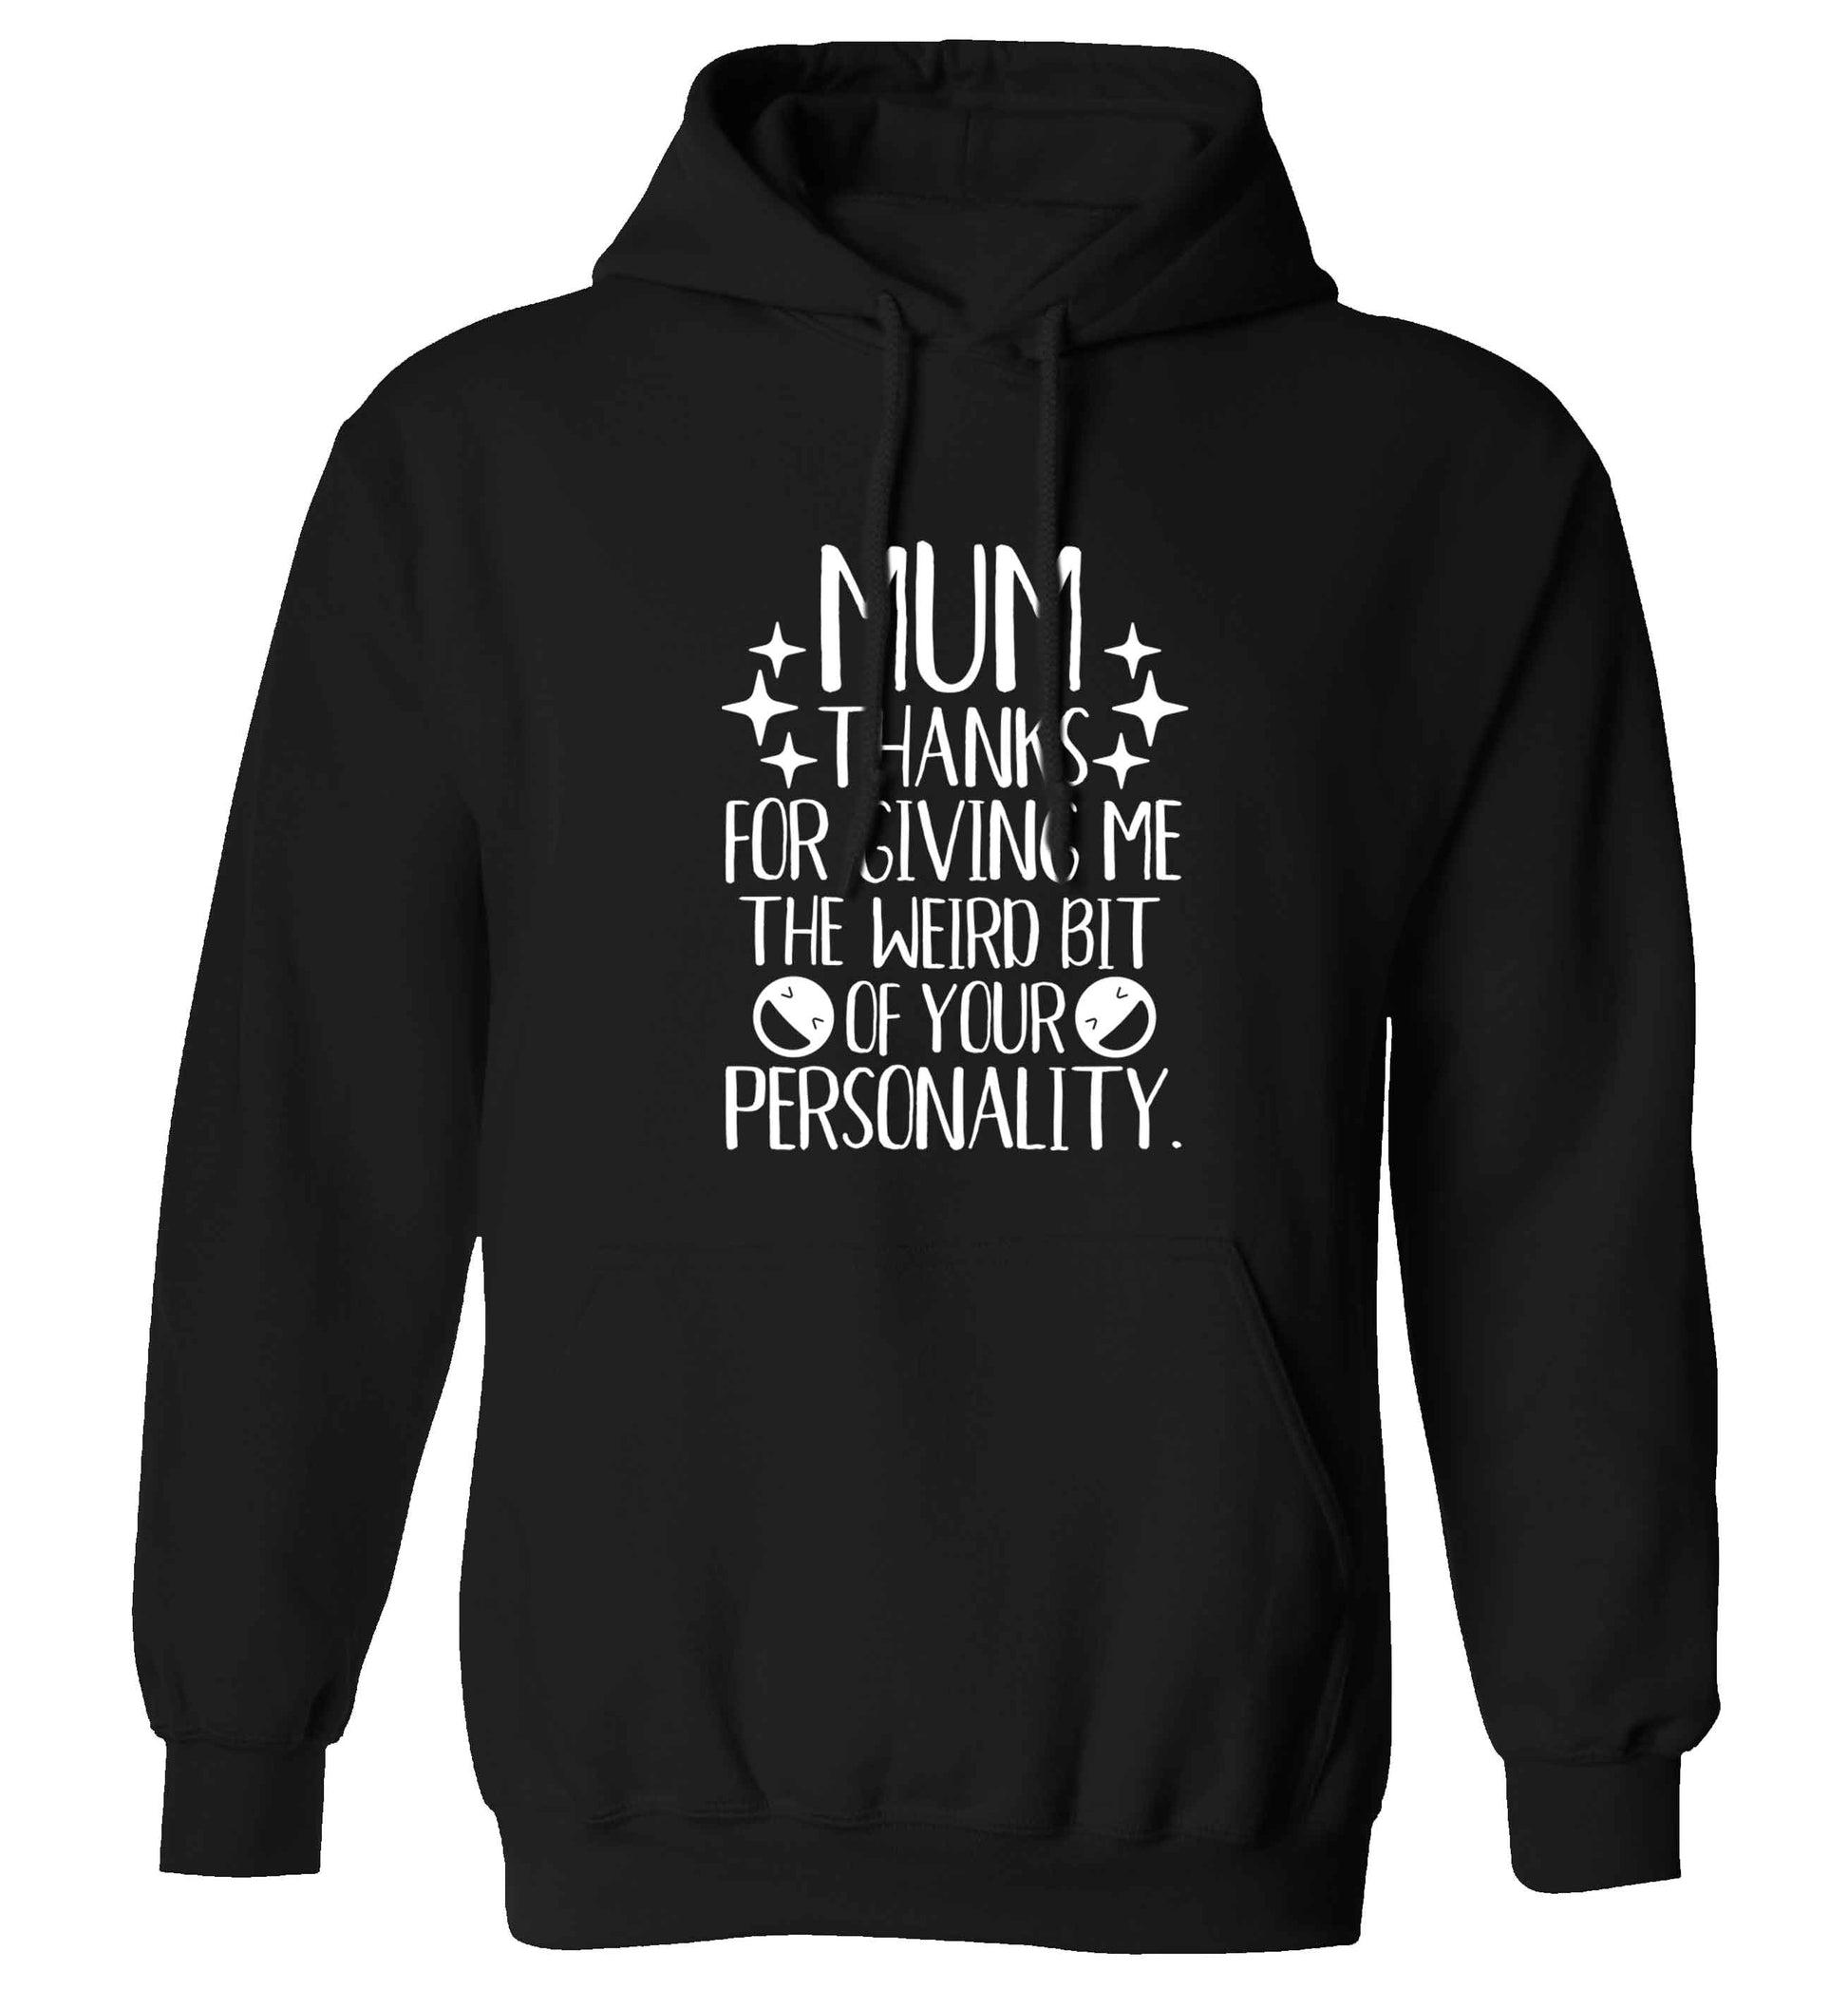 Mum thanks for giving me the weird bit of your personality adults unisex black hoodie 2XL